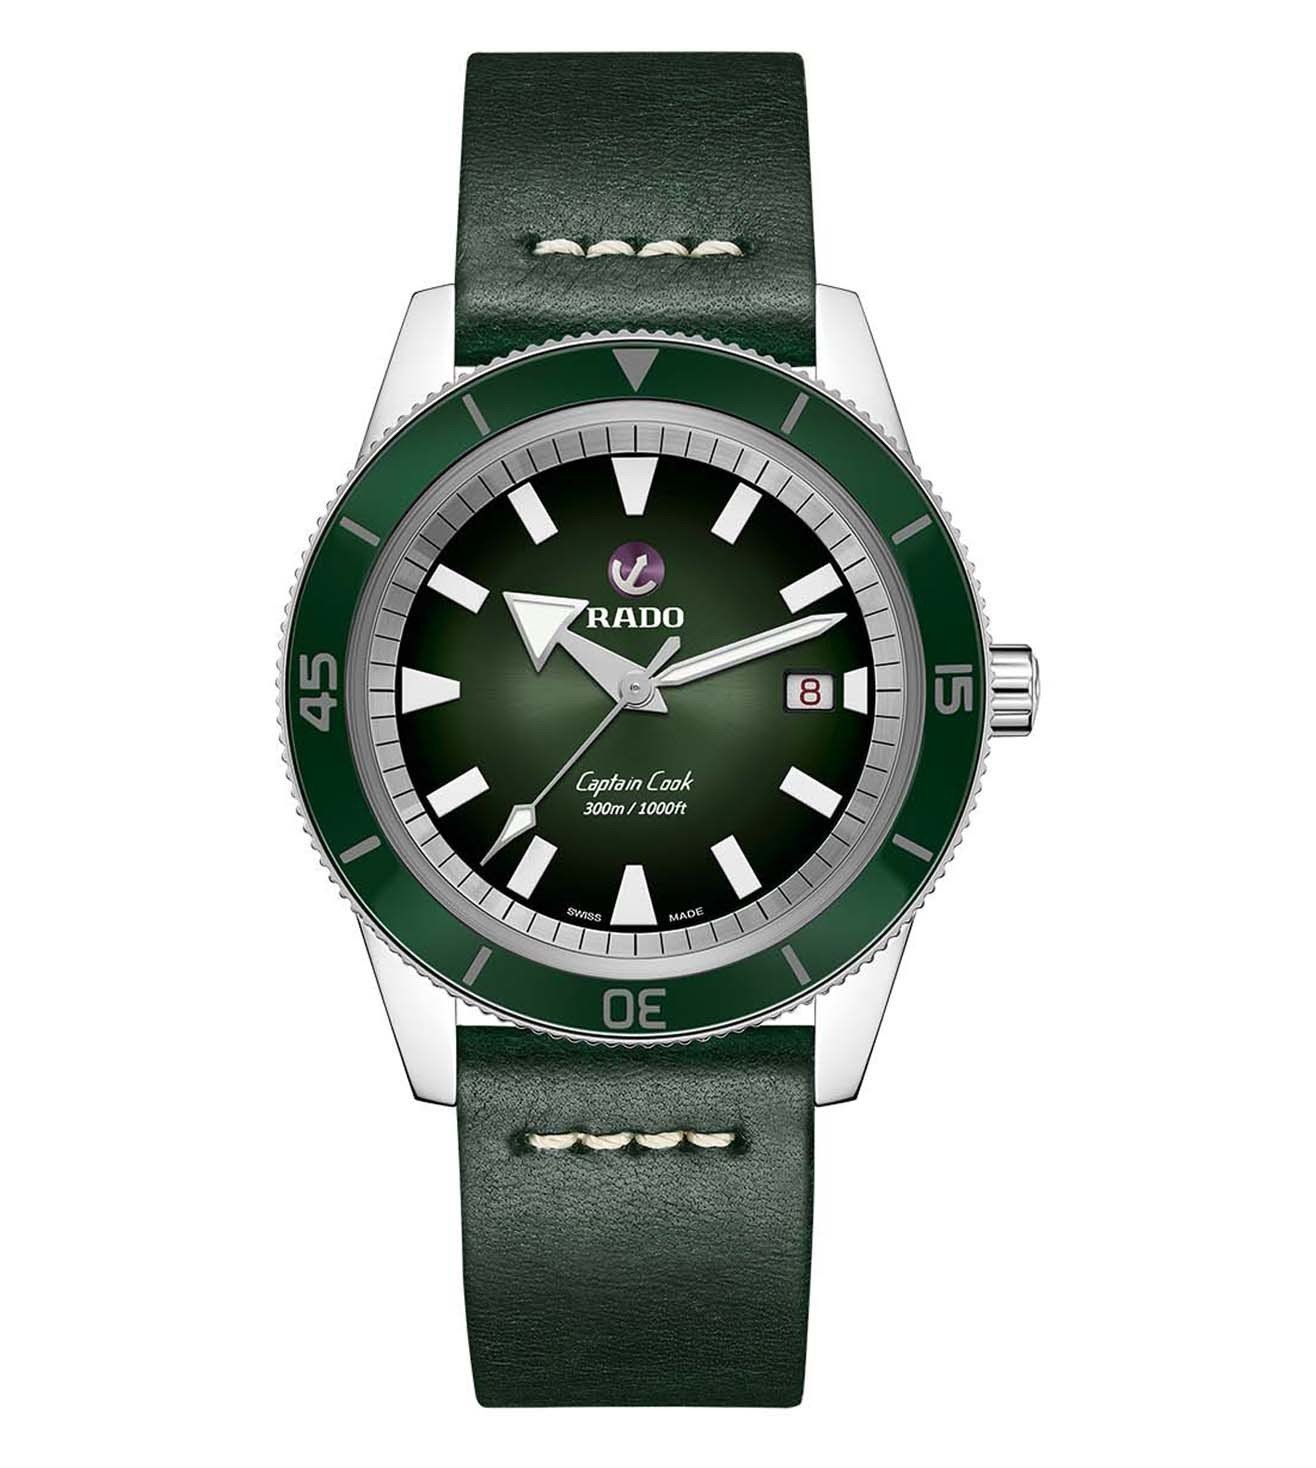 R32105319 | RADO Captain Cook Automatic - Hrithik Roshan Edition Watch for Men (2 Additional Straps)